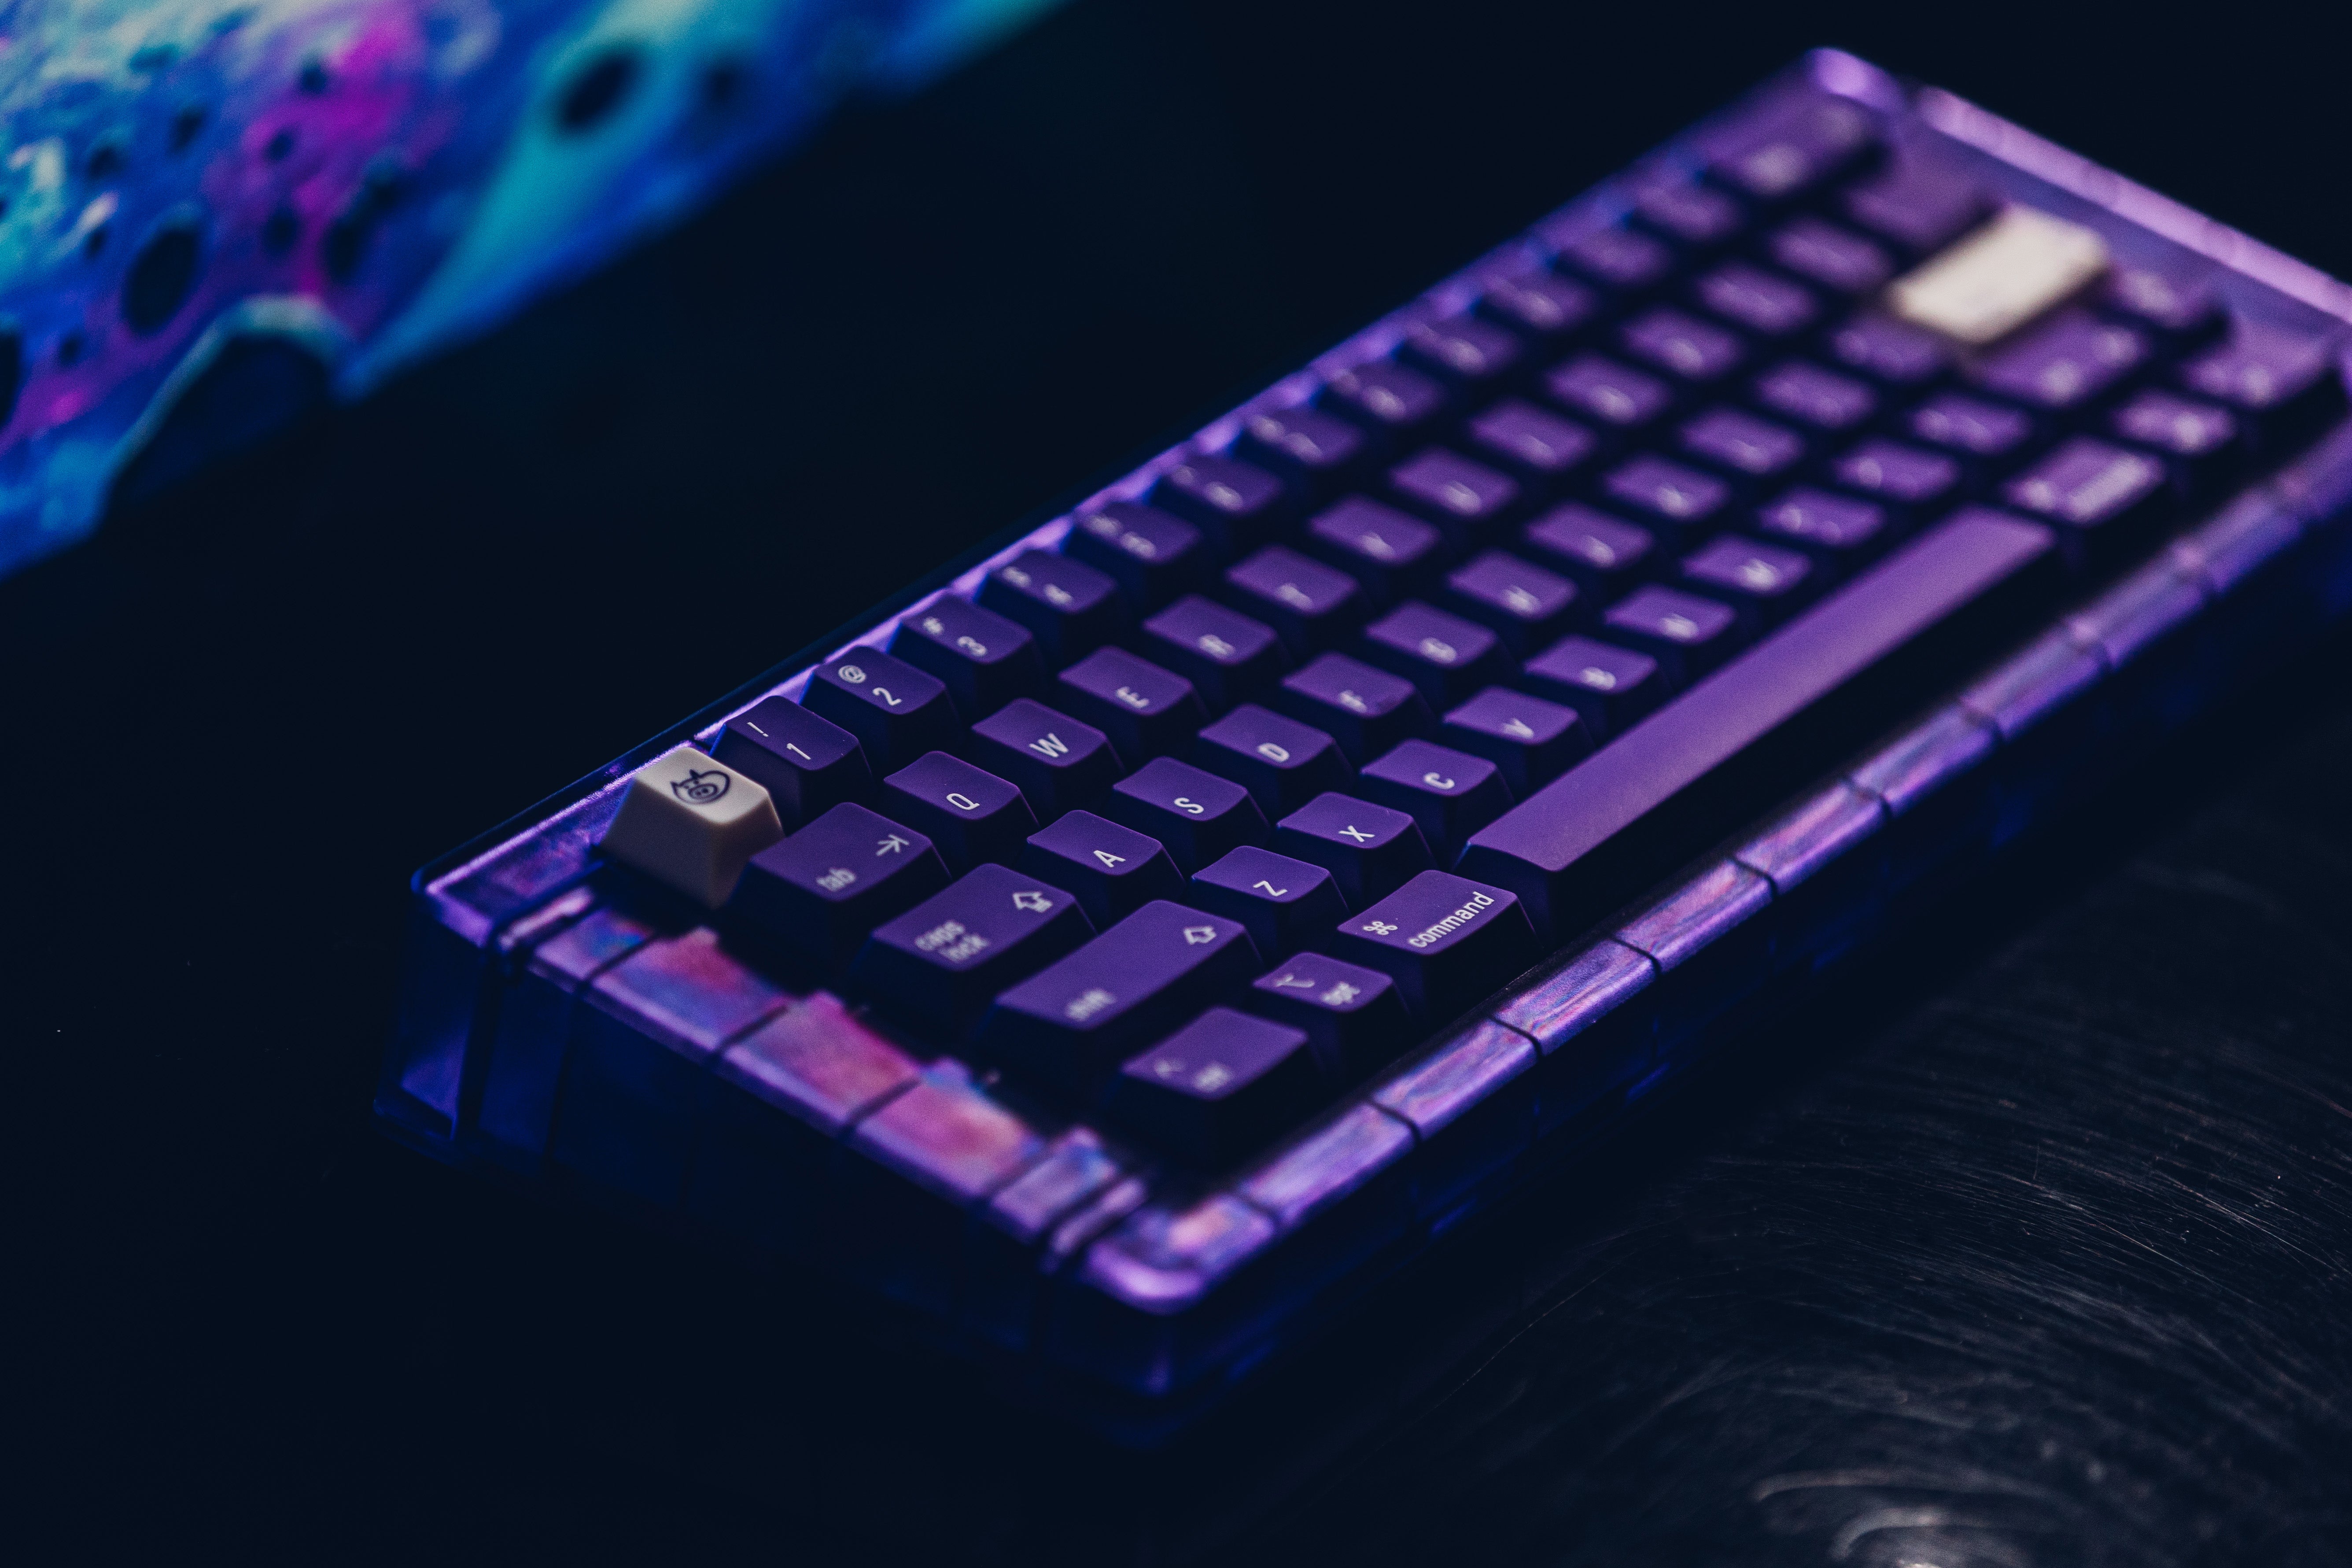 [In Stock] BBOX60 Cyberspace Translucent Purple PreBuilt Ready-to-use Keyboard